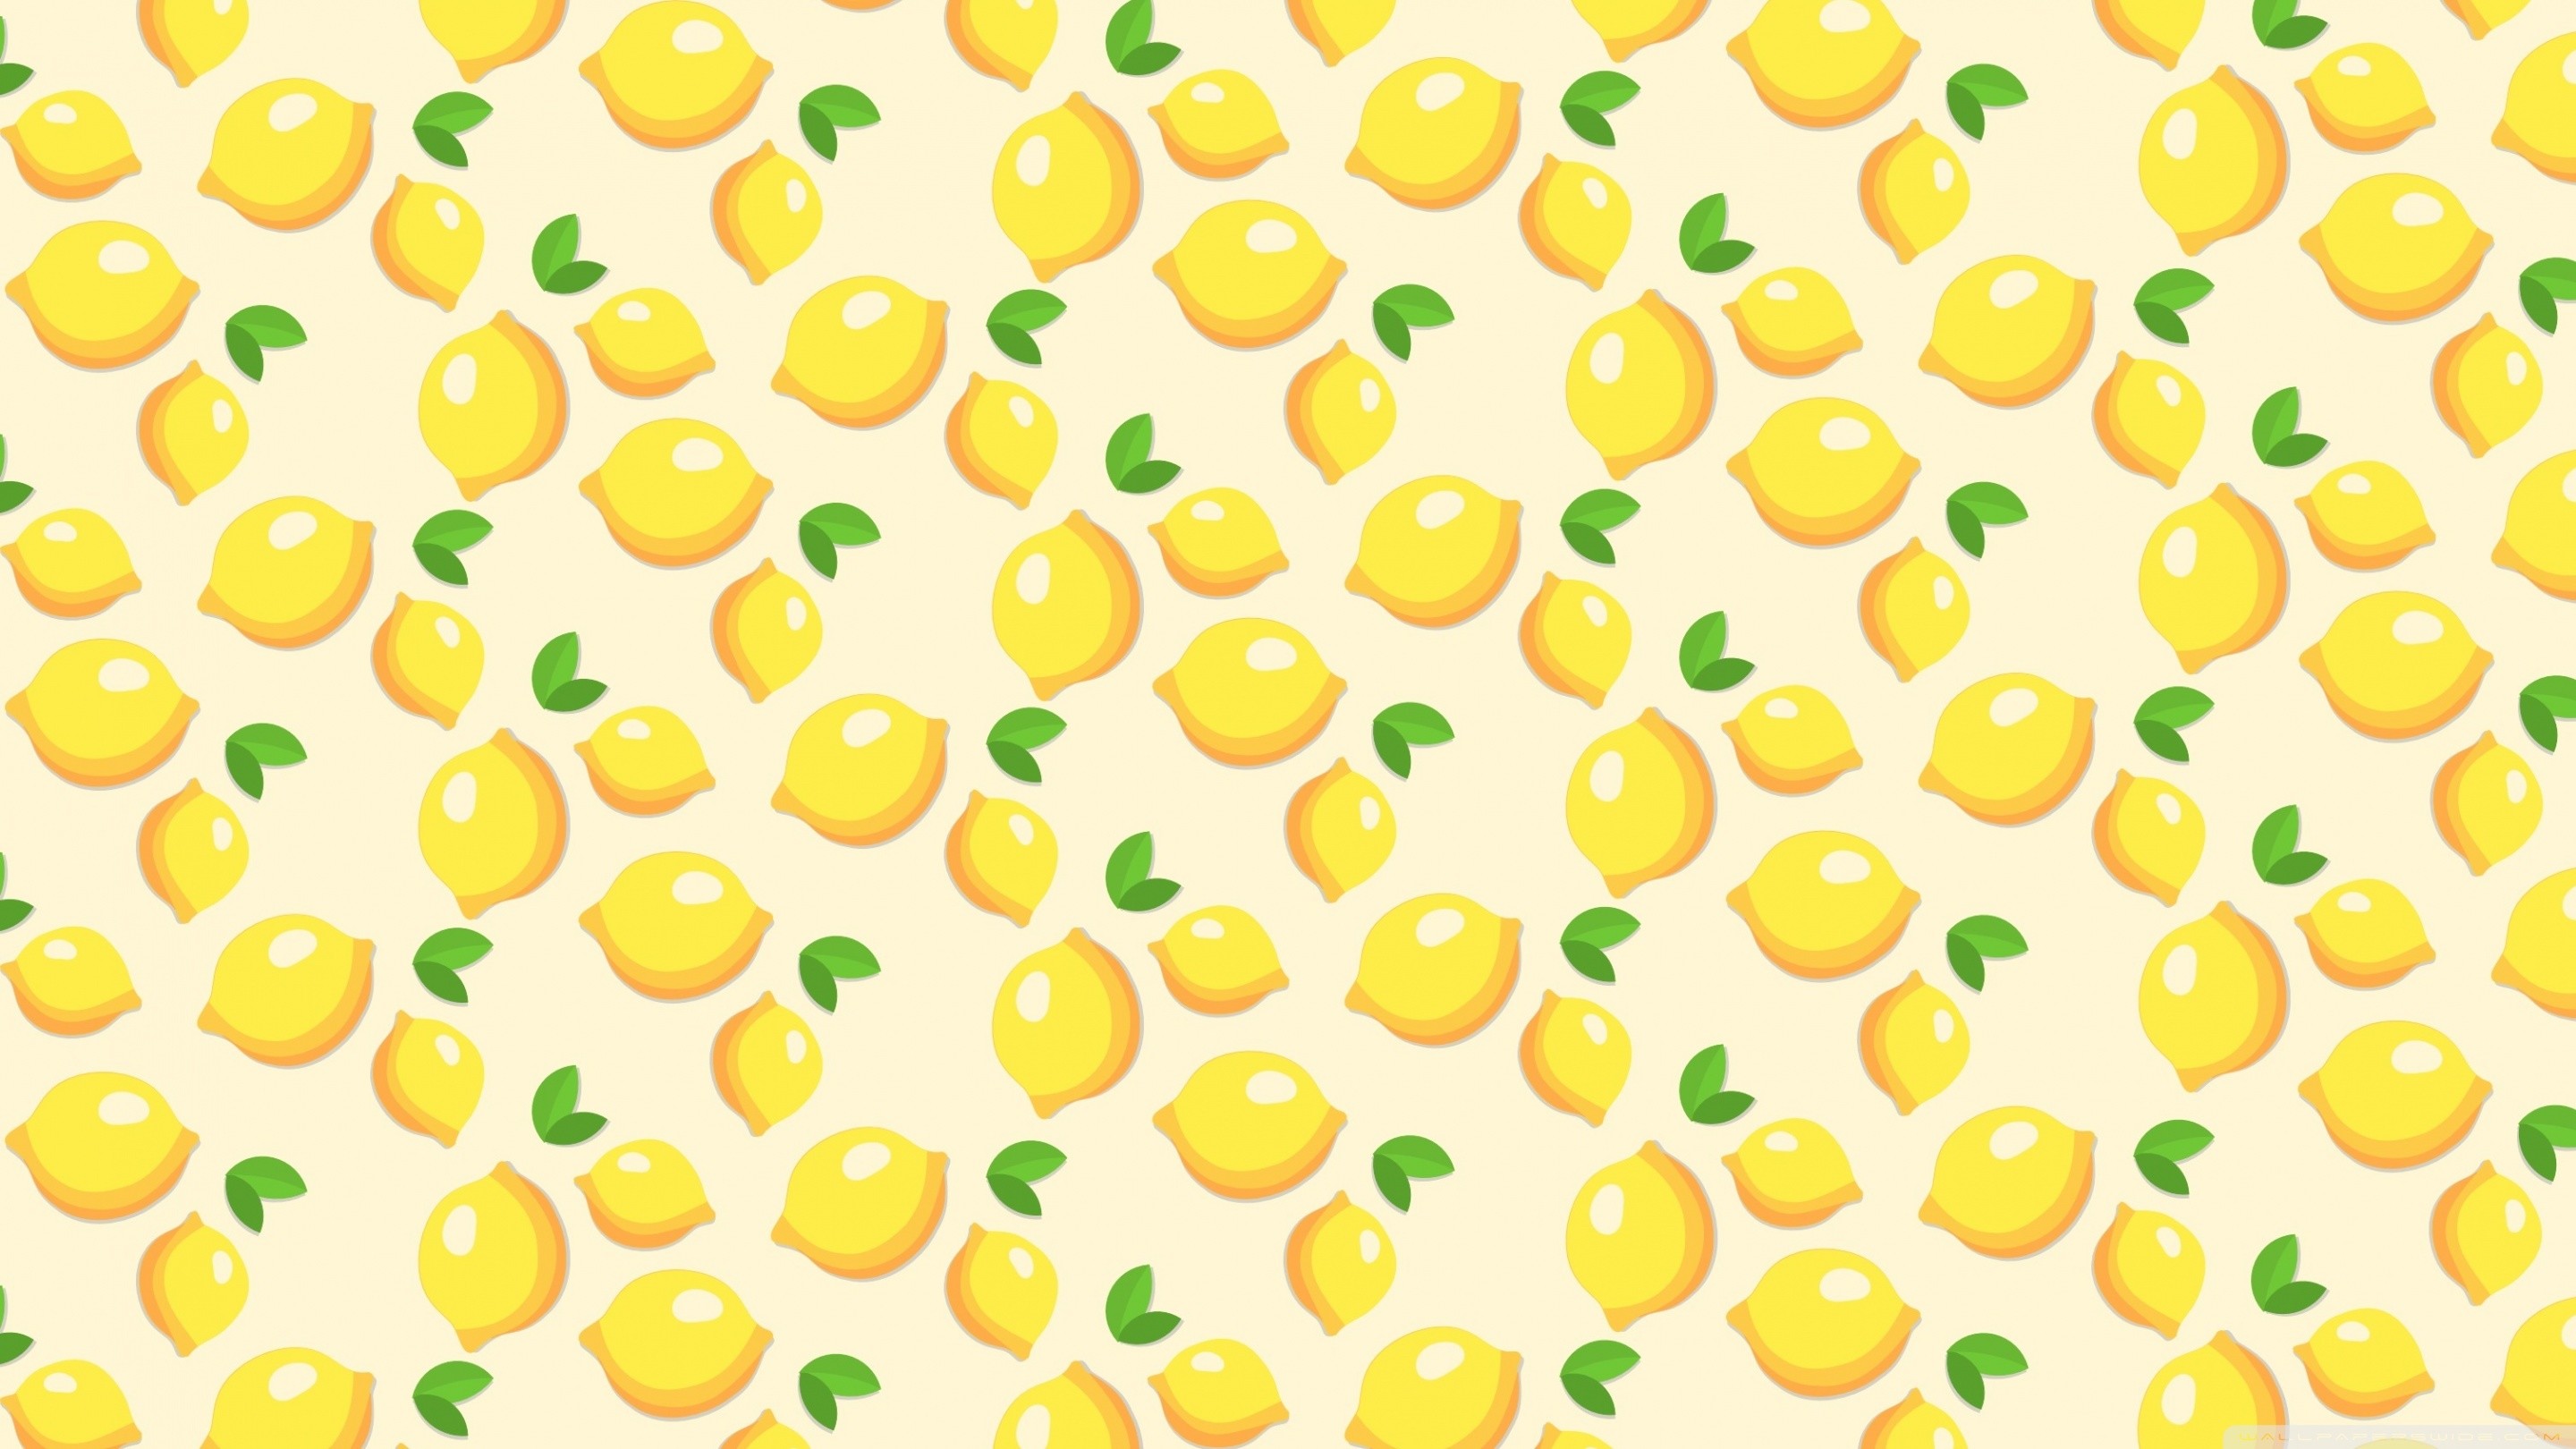 2880x1620, Wallpaperswide - Yellow Aesthetic Computer Background - HD Wallpaper 